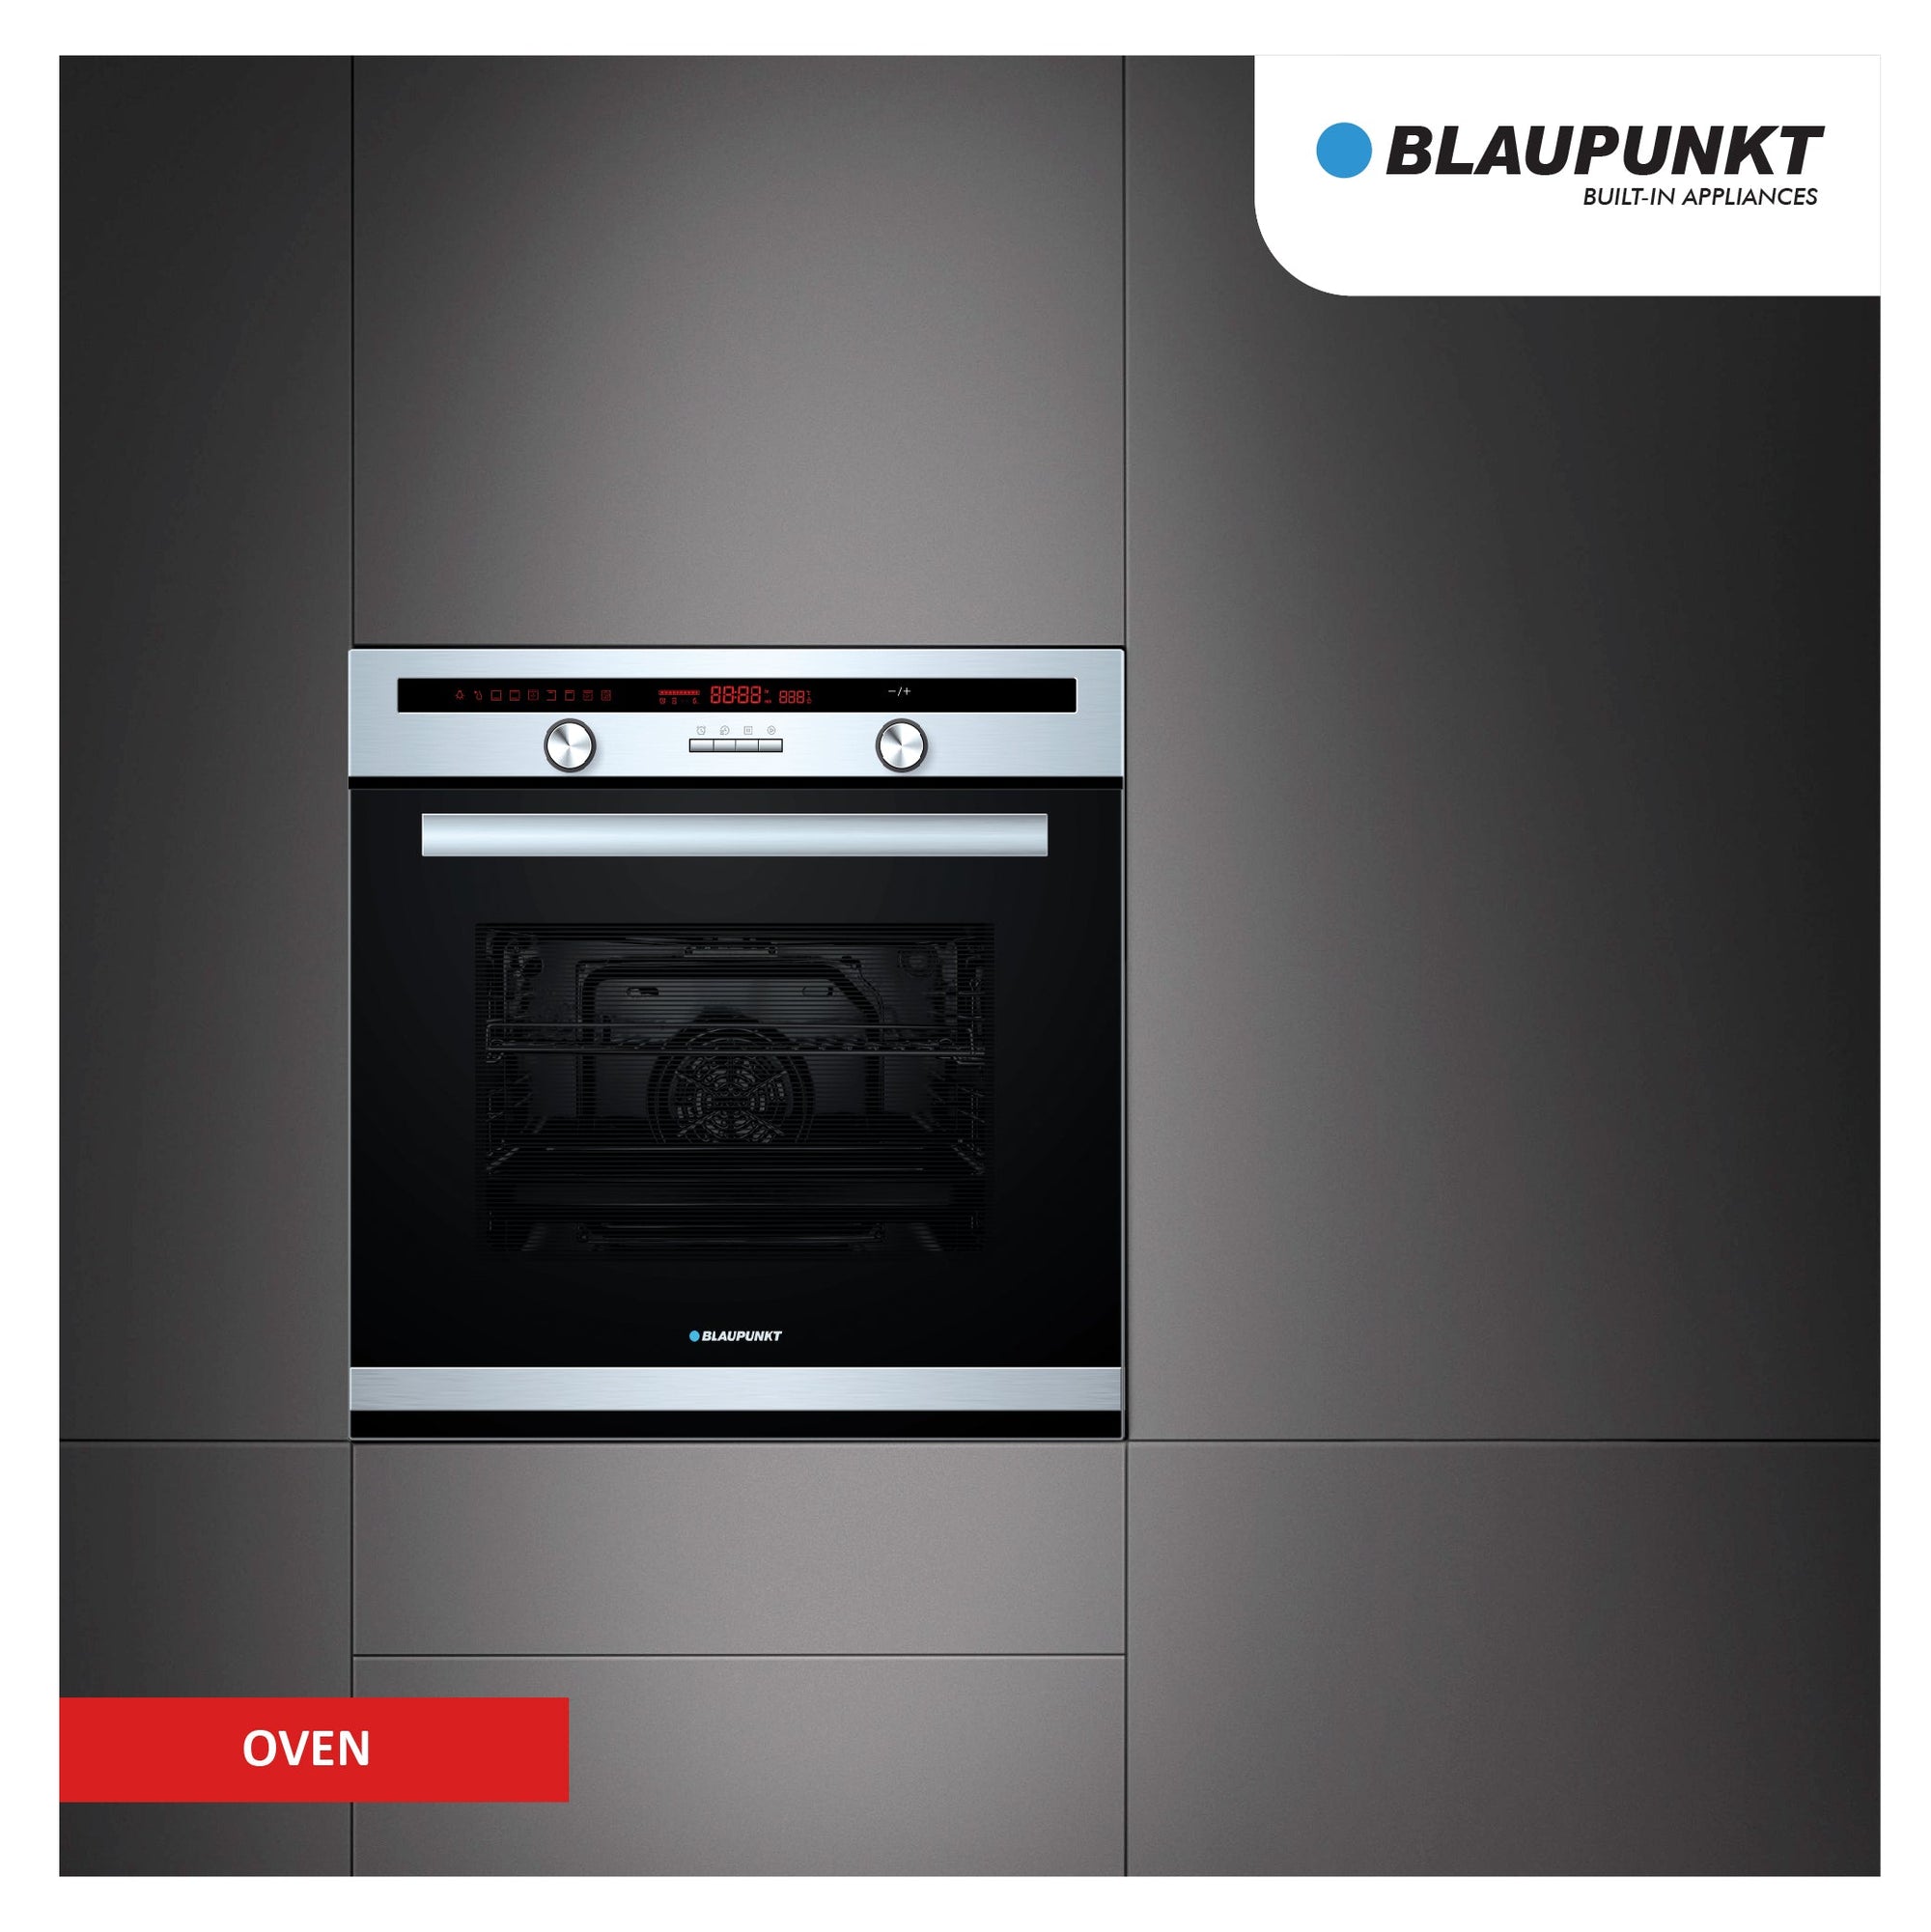 Blaupunkt precision ovens by M. M. Noorbhoy & Co - High-quality cooking appliances for culinary perfection in your kitchen.